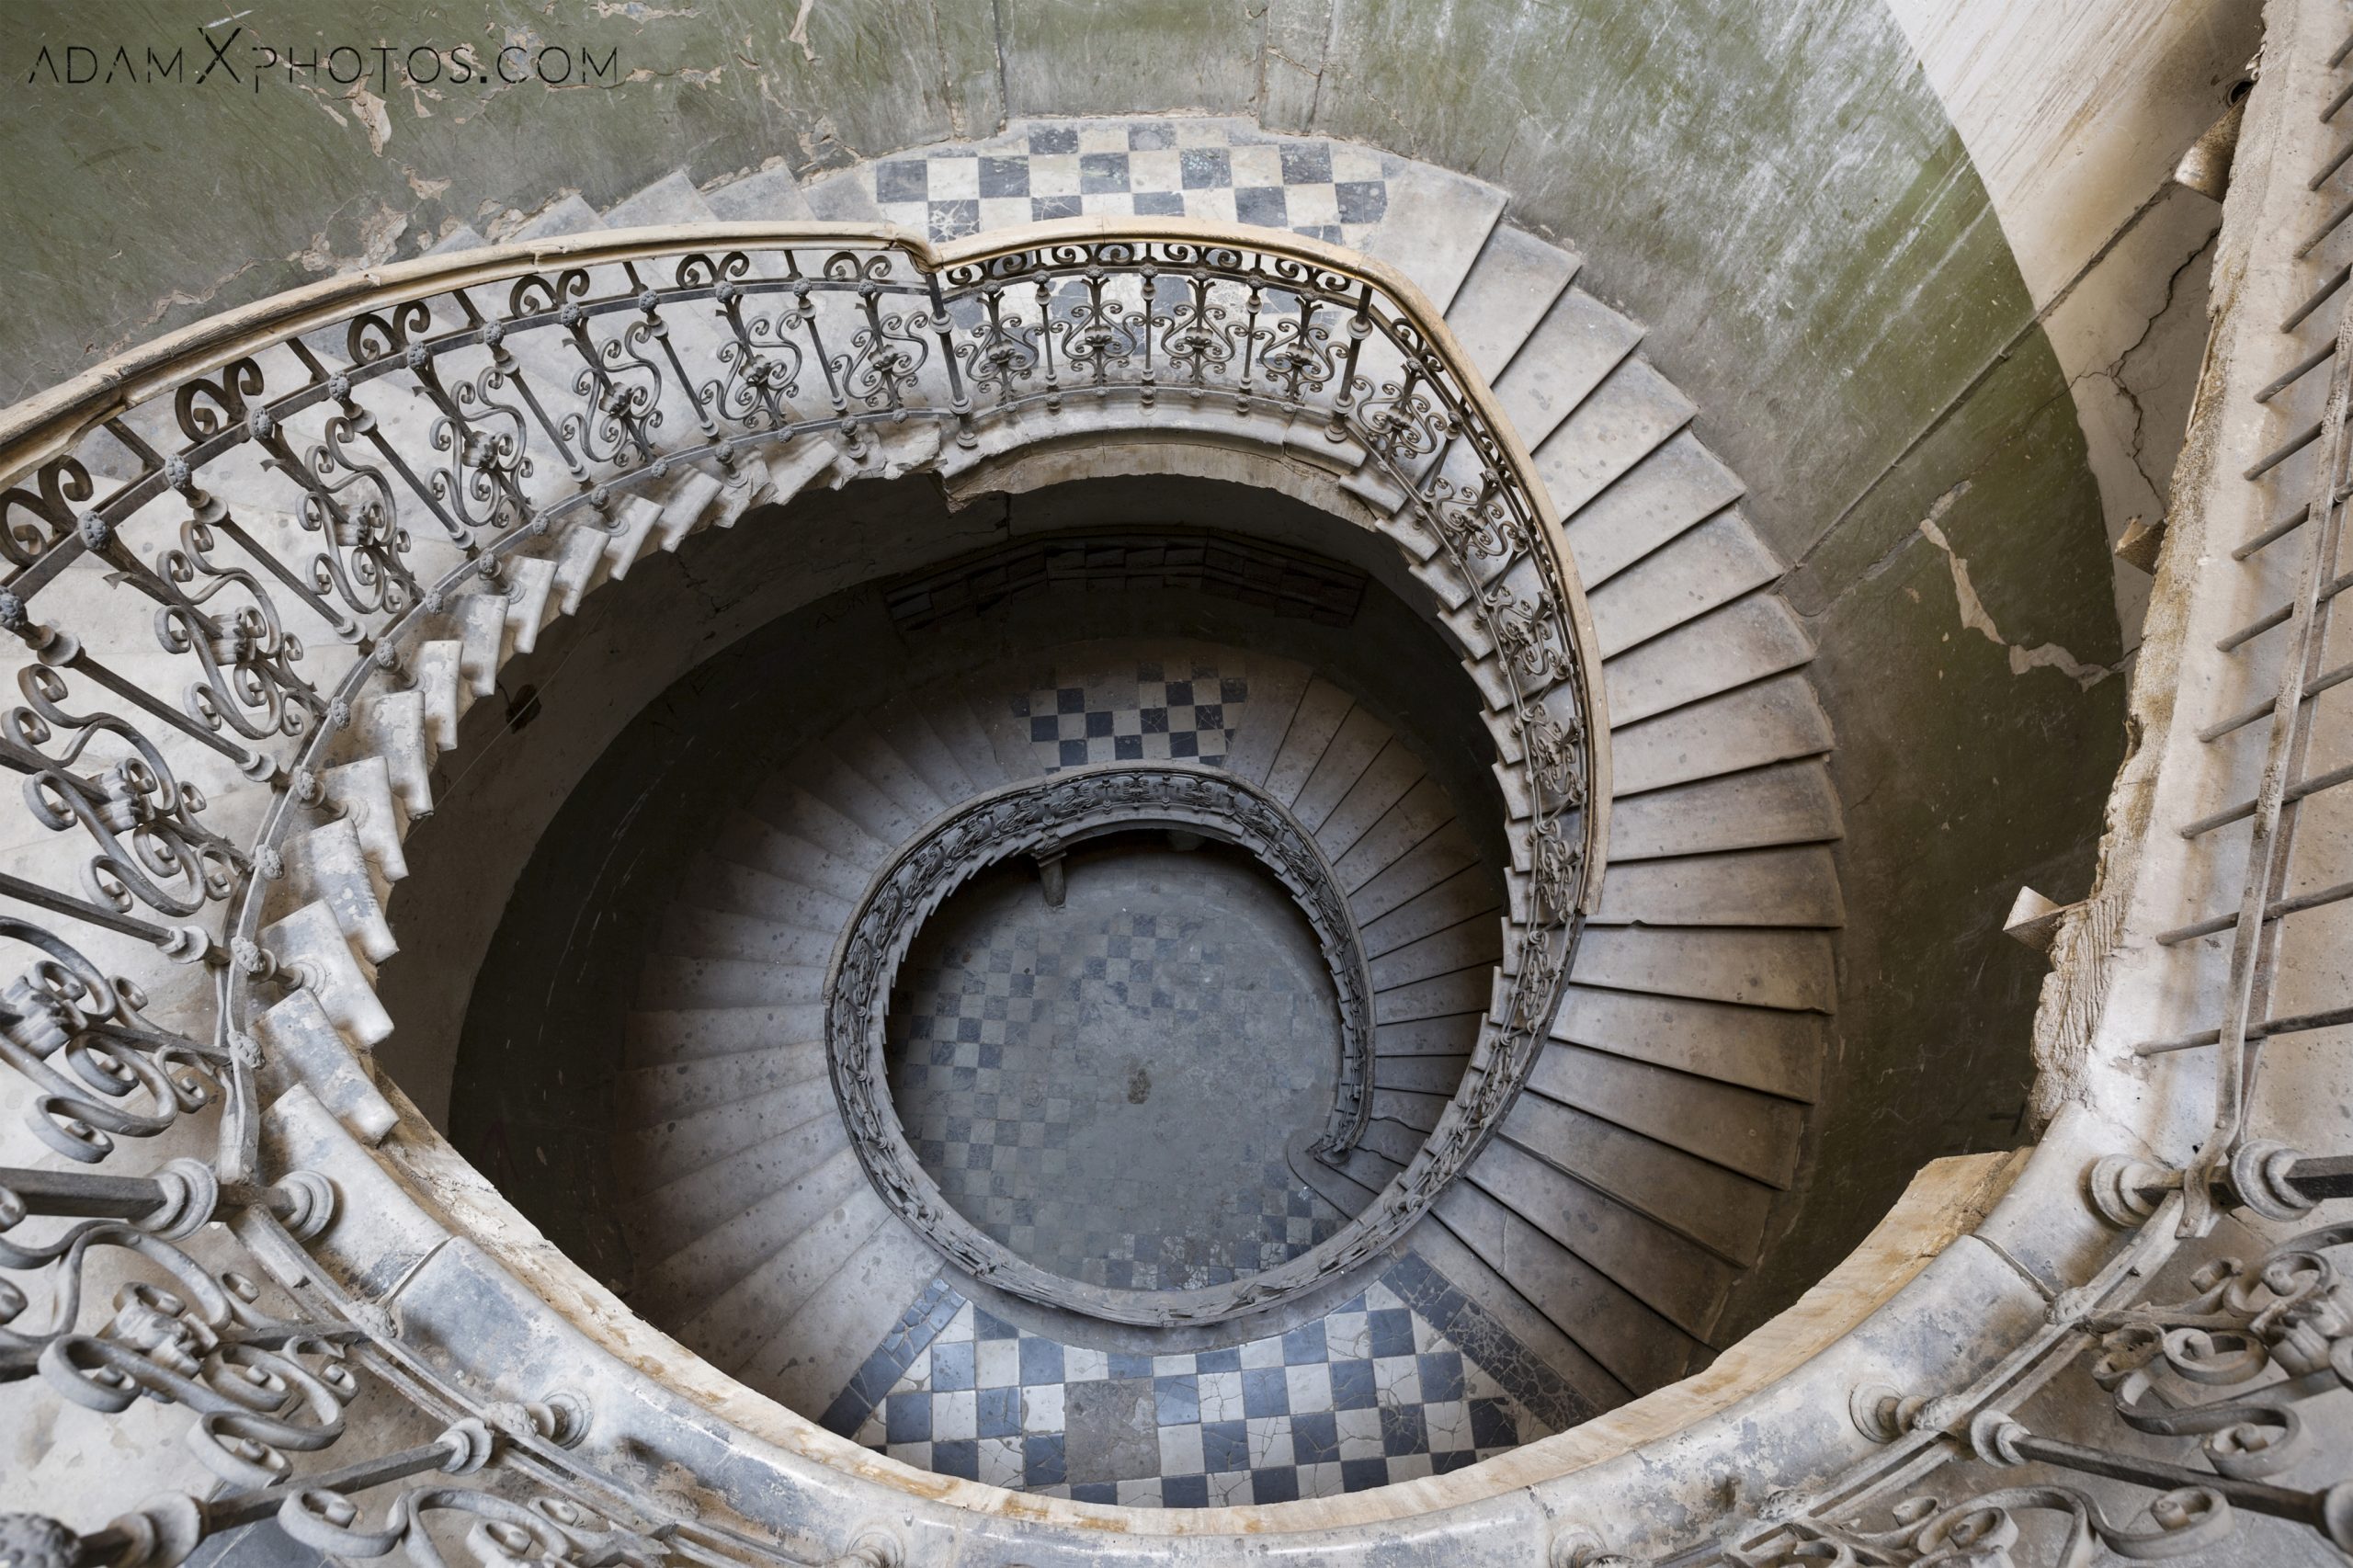 Green staircase stairs stairwell ornate spiral Tbilisi Georgia Soviet era Adam X Urbex Urban Exploration 2018 Abandoned Access History decay ruins lost forgotten derelict location creepy haunting eerie security